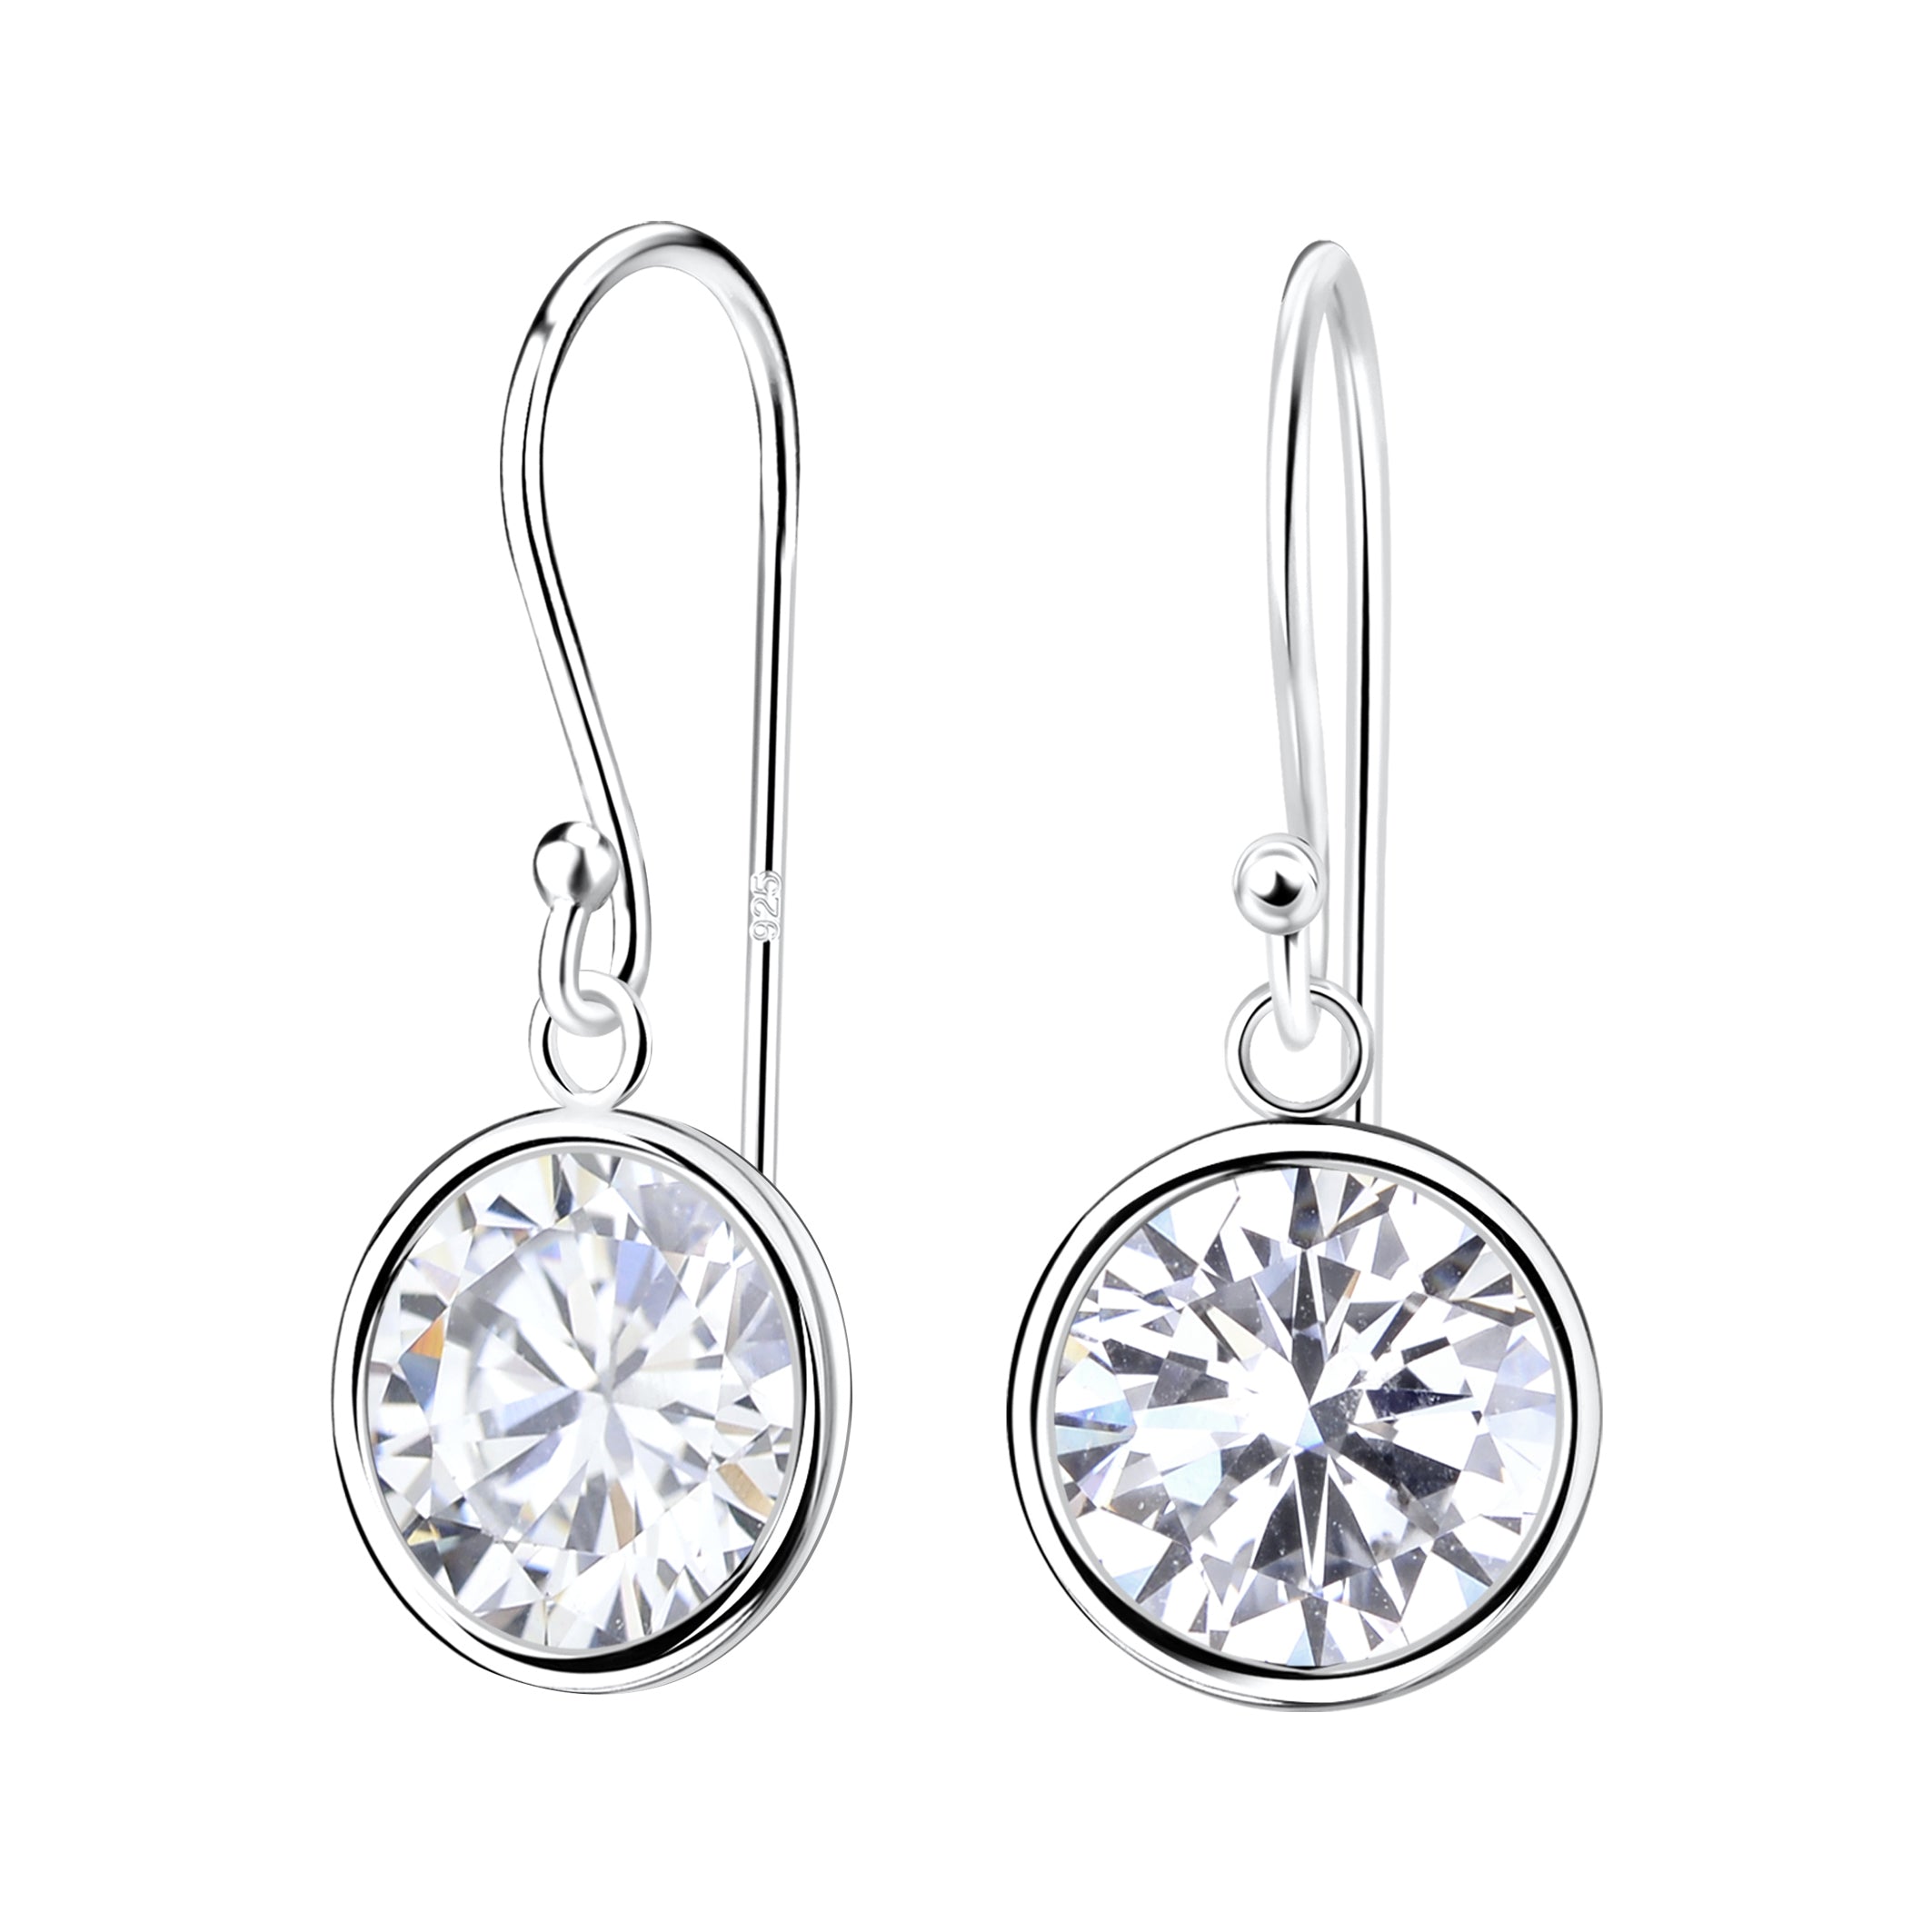 10mm Round Cubic Zirconia Silver Earrings